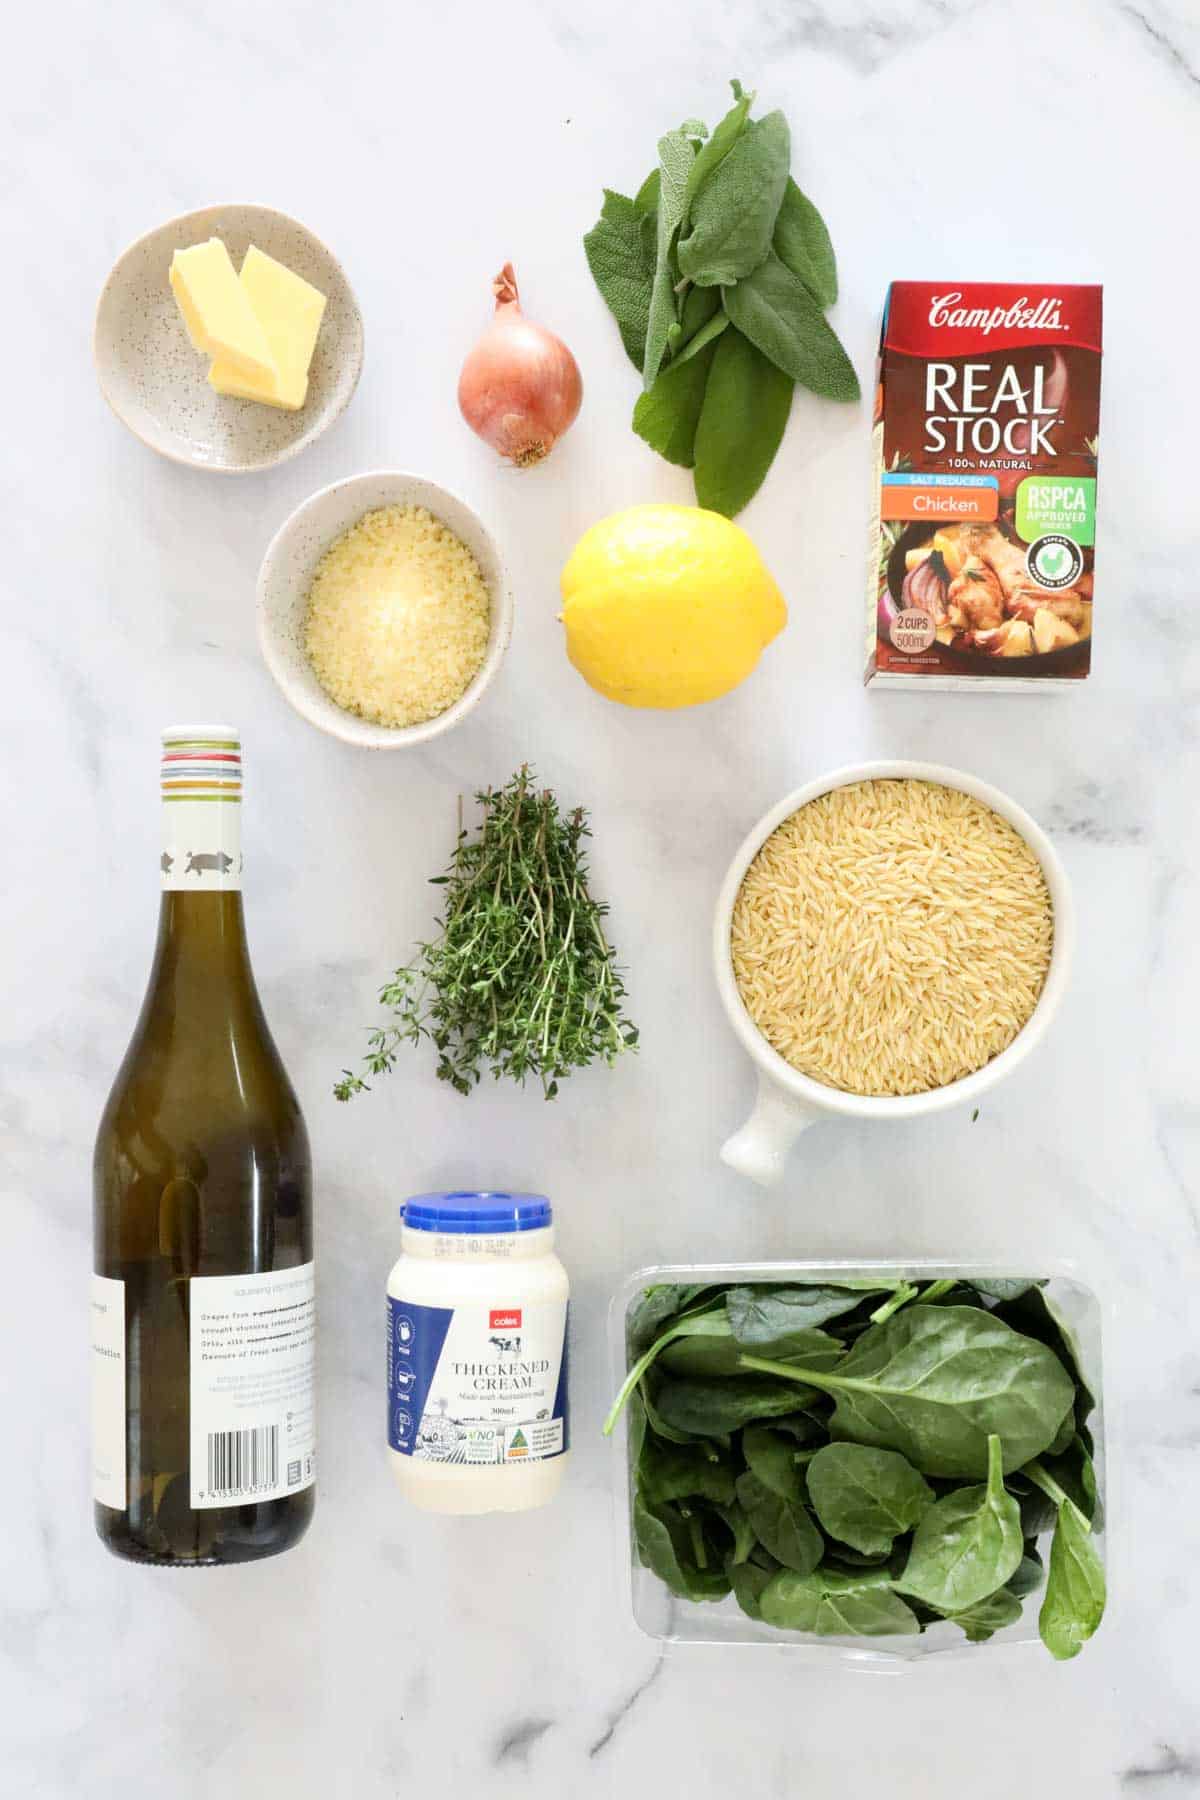 Ingredients for crispy sage leaves and creamy lemon & spinach risoni.